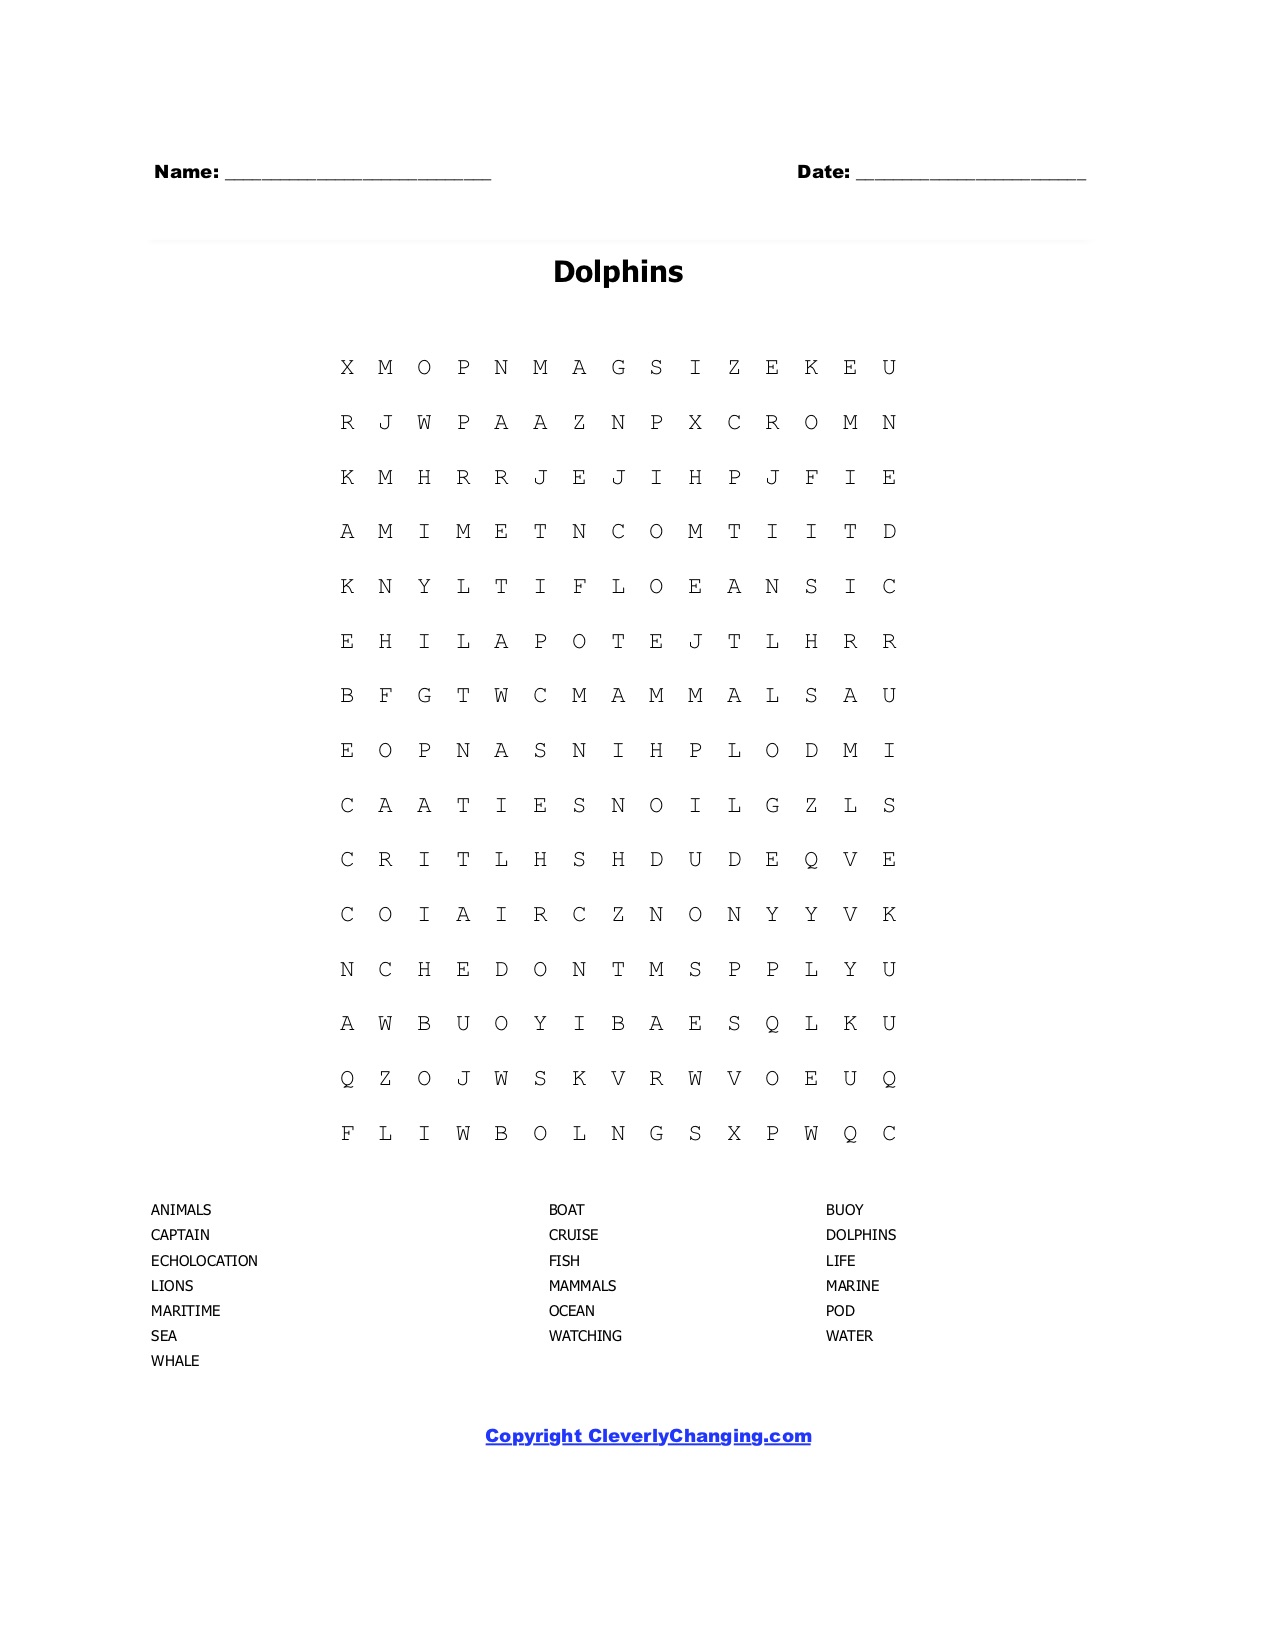 Dolphins Word Search Puzzle